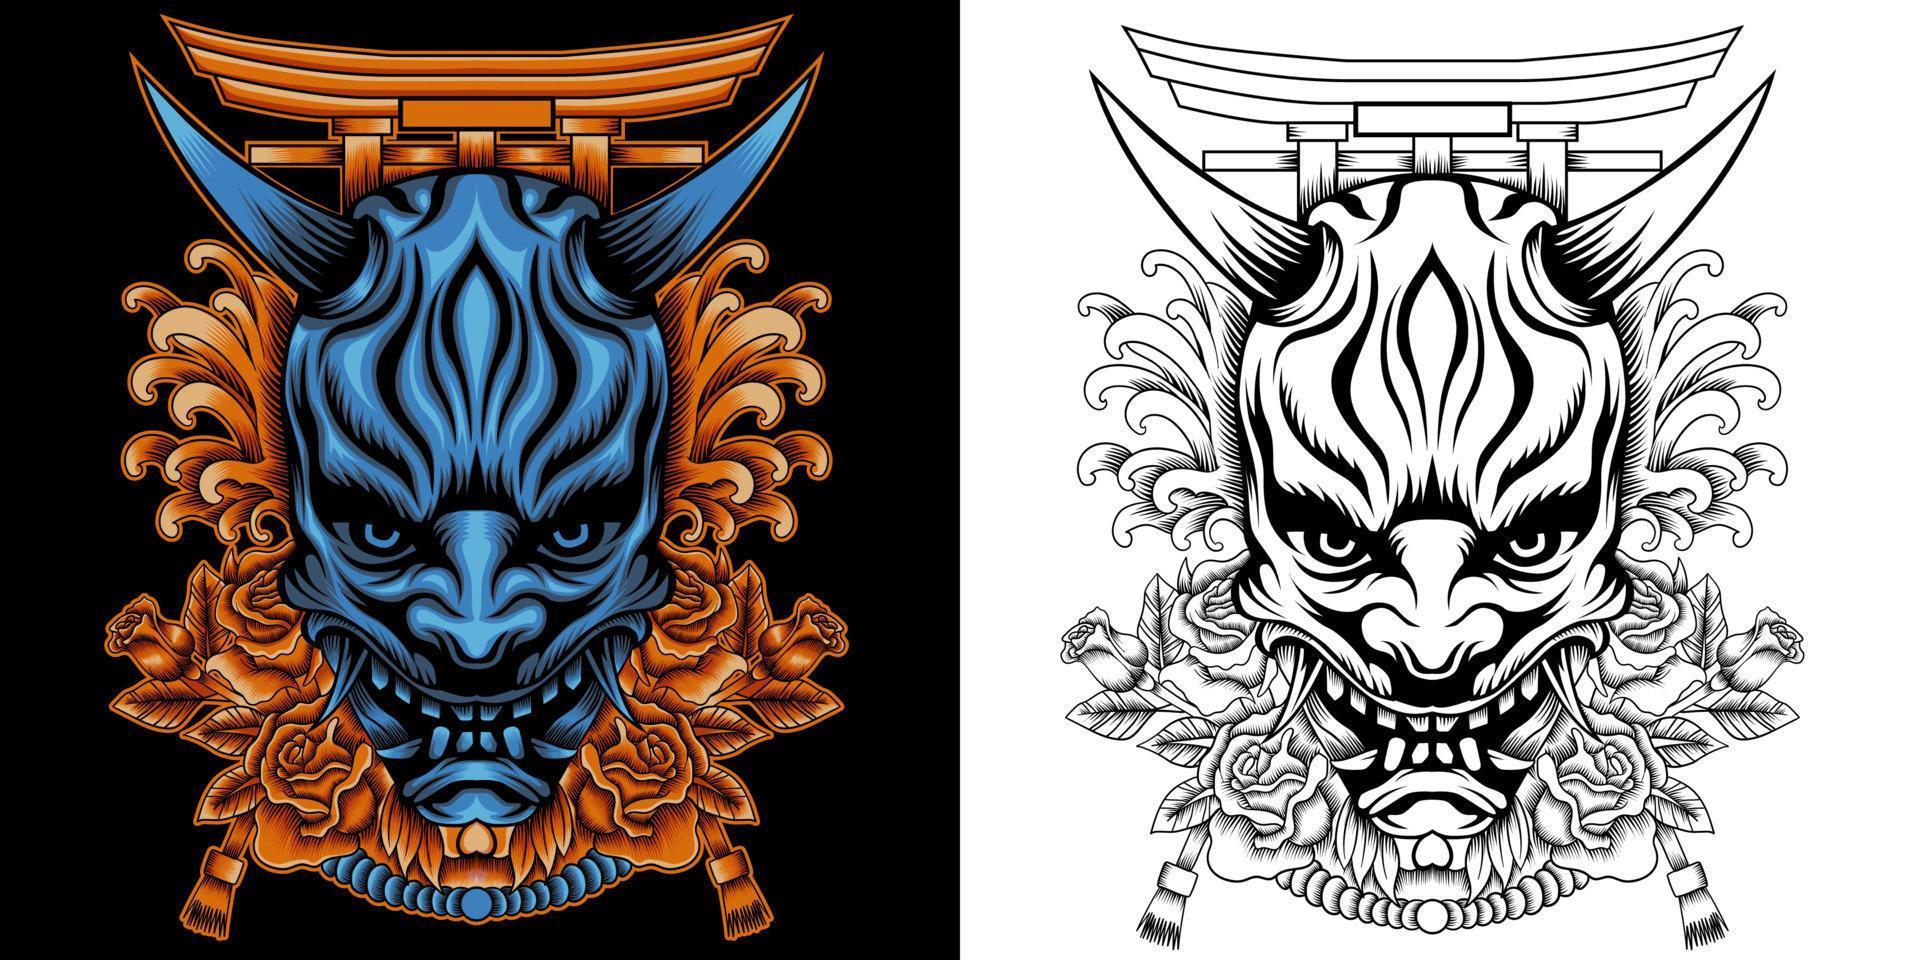 Oni mask with roses, tori gate, and japanese ornament. vector illustration